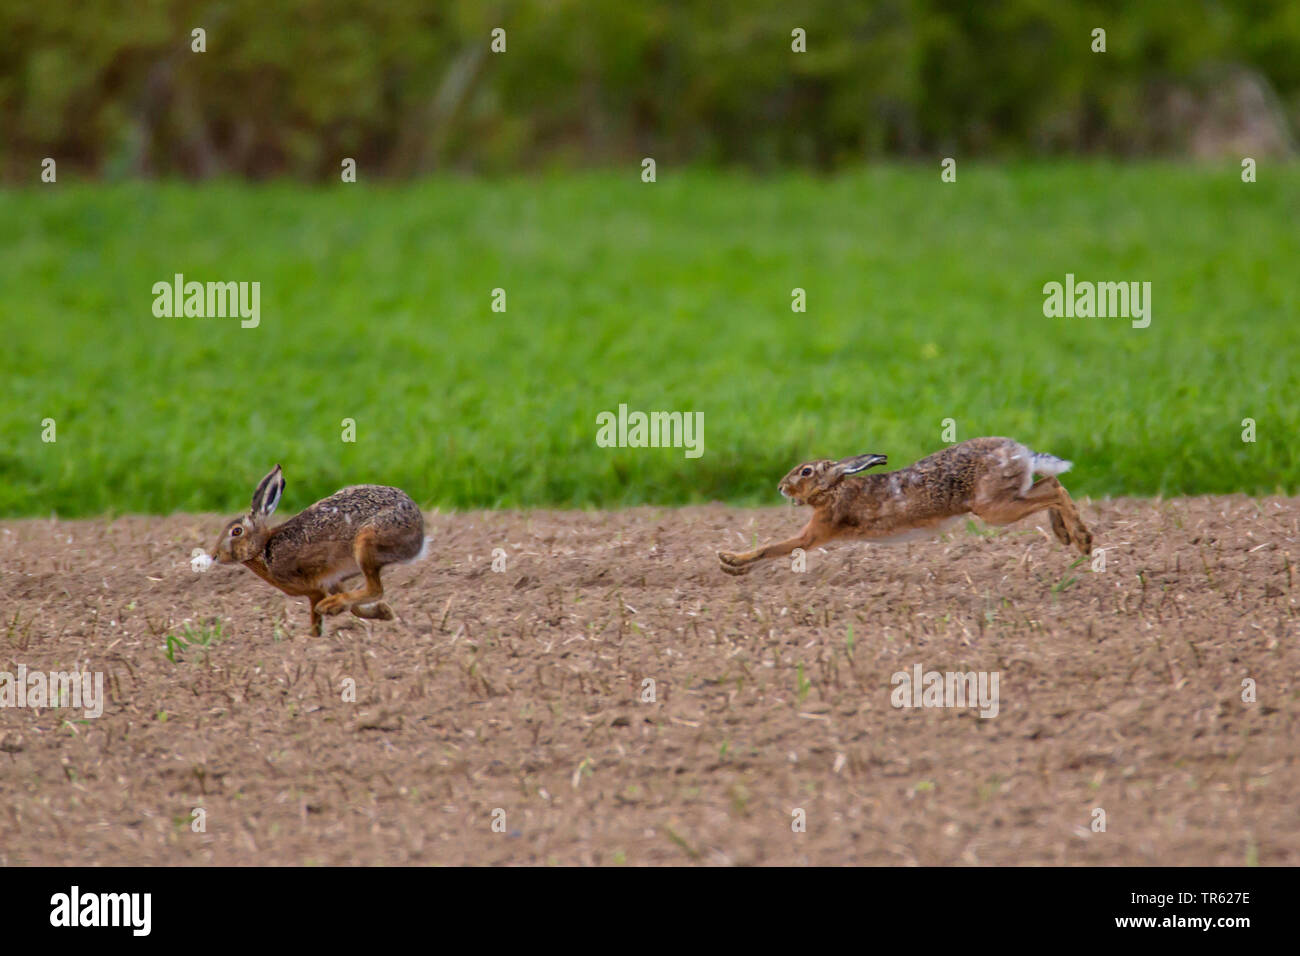 European hare, Brown hare (Lepus europaeus), two hares chasing each other across an acre during the mating season, Germany, Bavaria Stock Photo